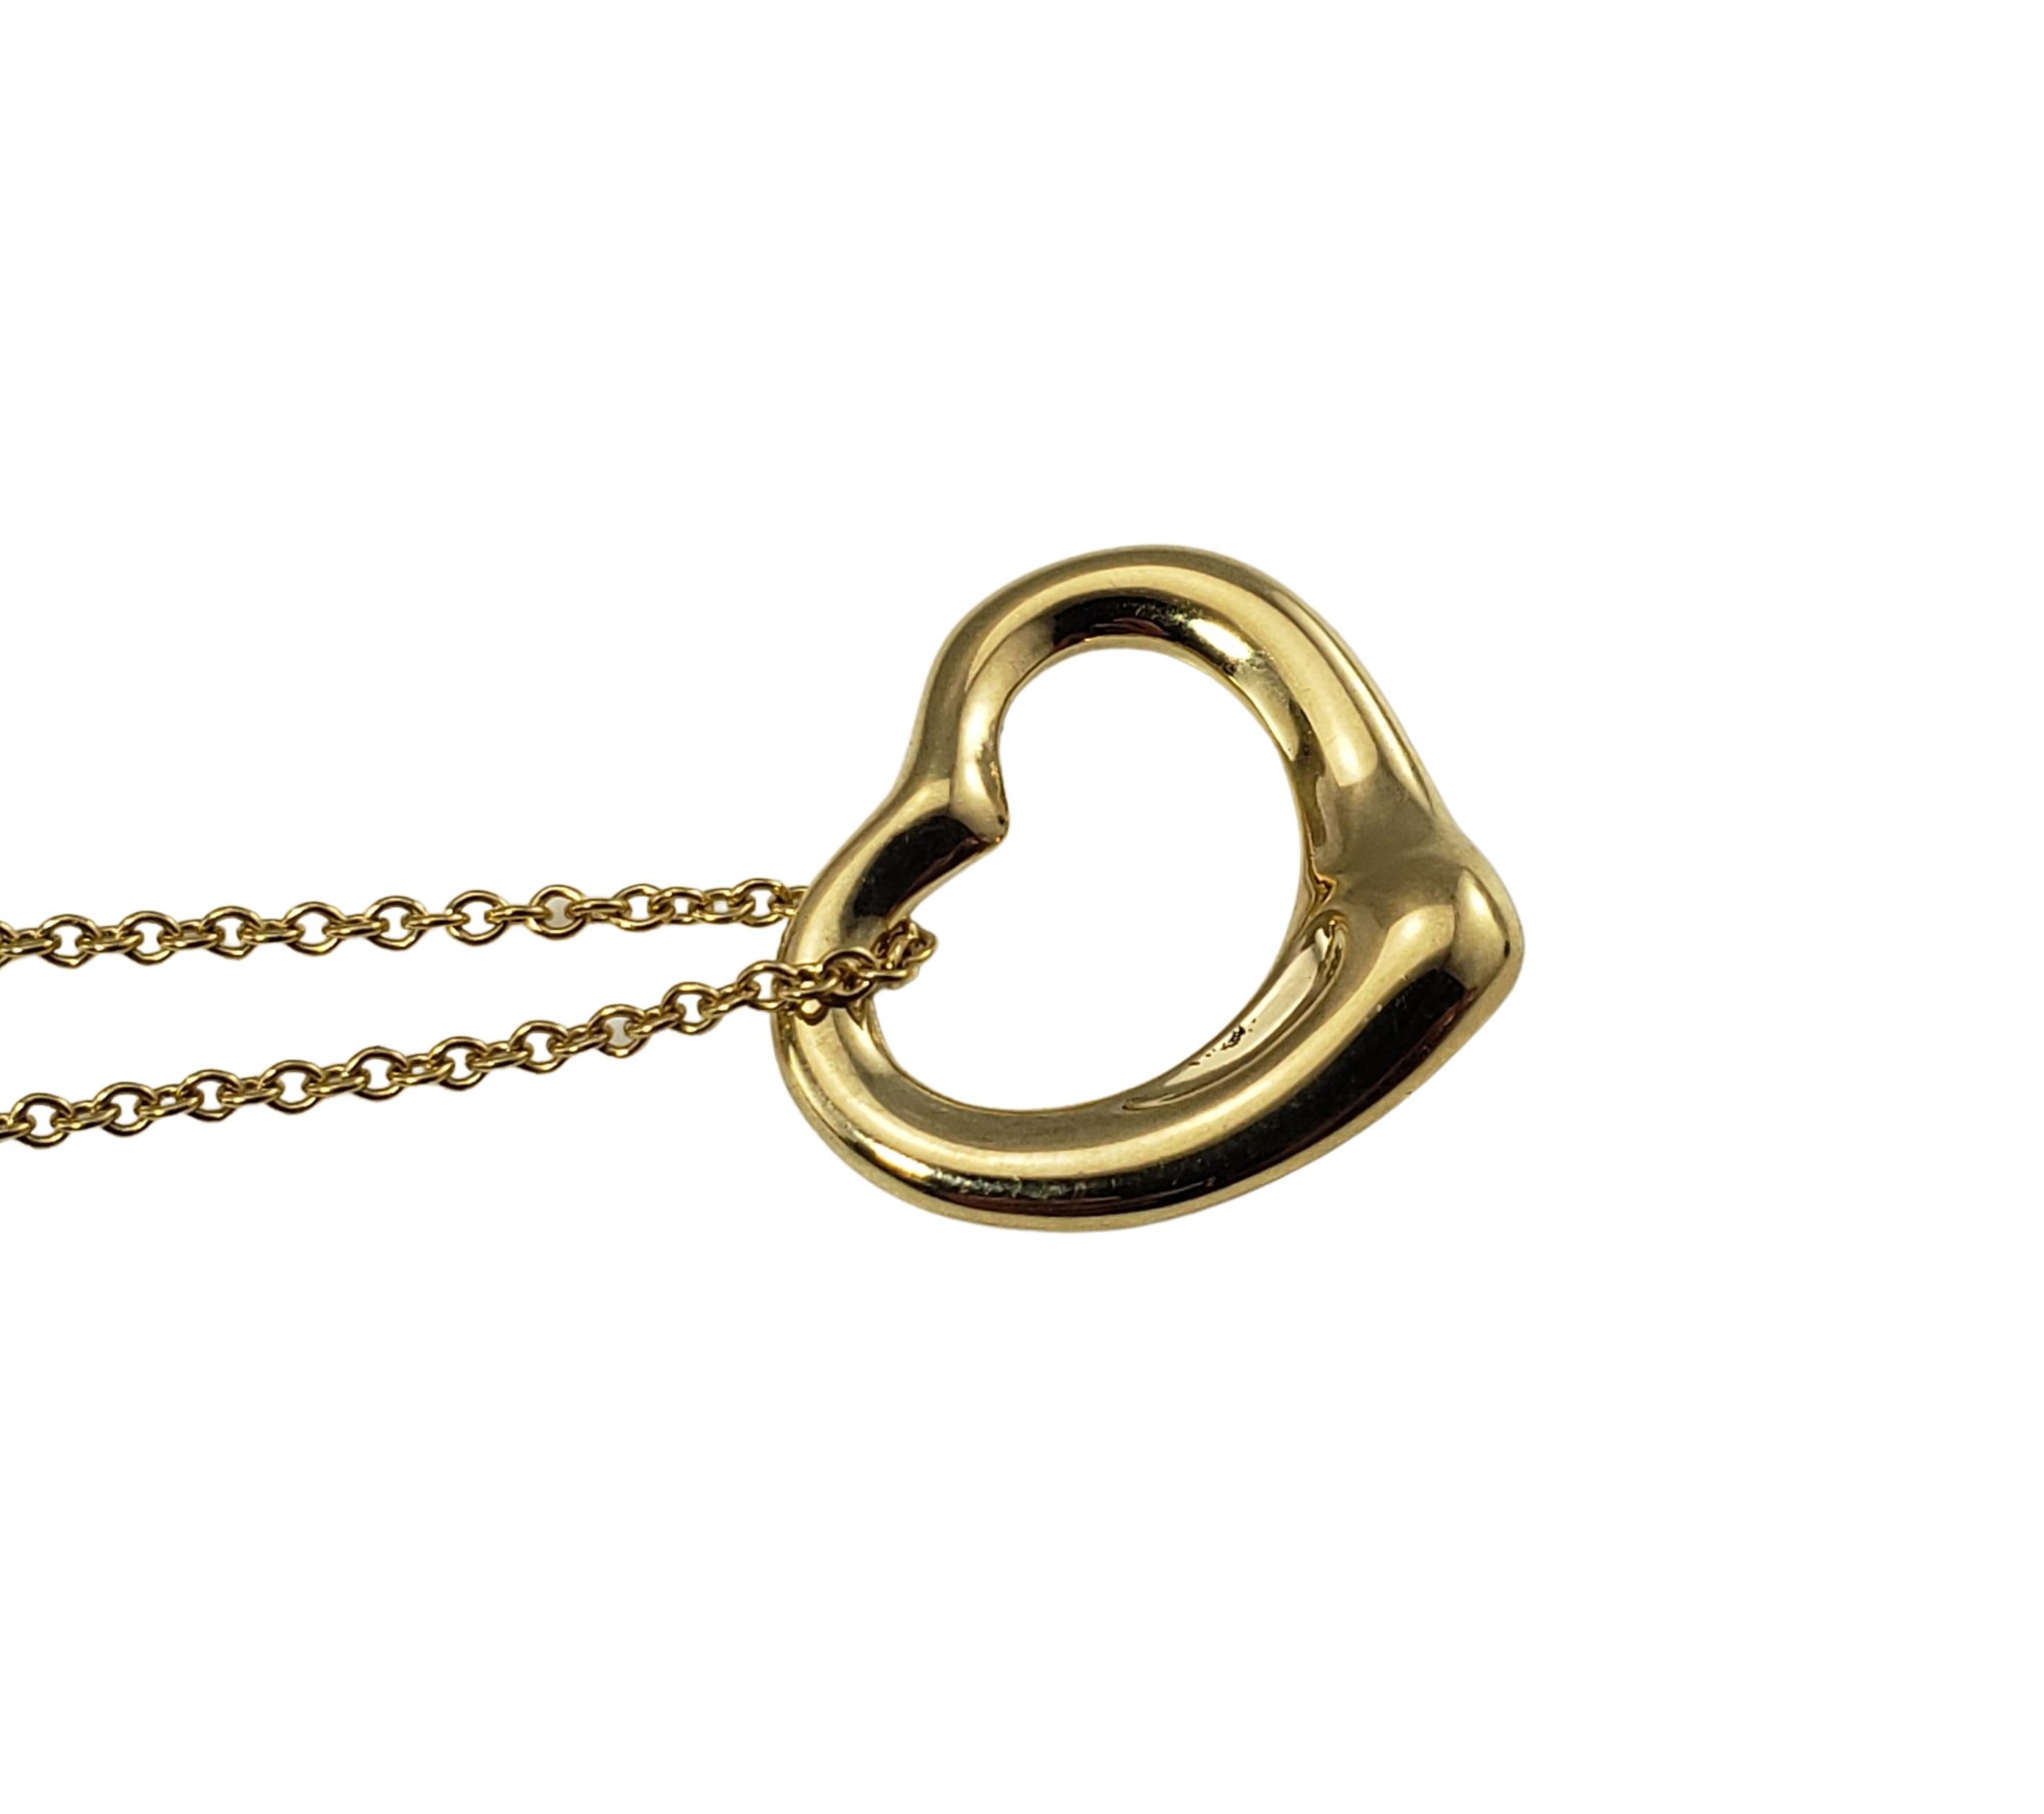 Tiffany & Co. Elsa Peretti 18 Karat Yellow Gold Heart Pendant Necklace-

This lovely open heart by Elsa Peretti for Tiffany & Co. is crafted in beautifully detailed 18K yellow gold and suspends from a classic cable necklace.

Size:   15 mm (heart)
 